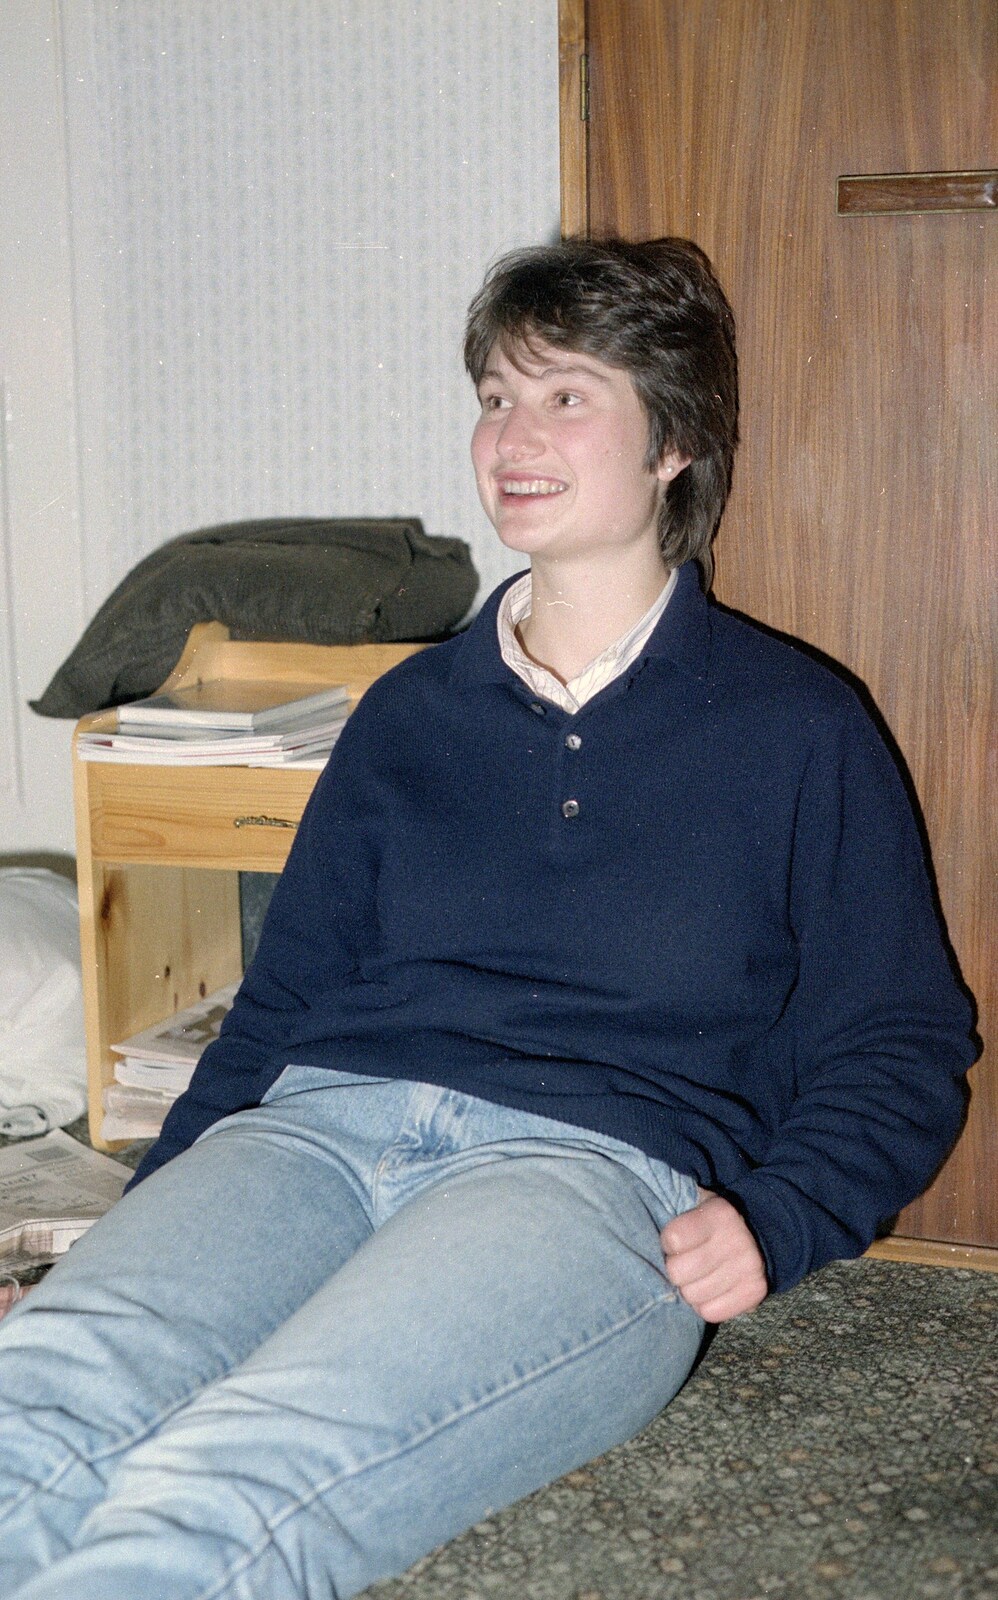 Angela sits on the floor of her room from Uni: Kate, A Lampshade and the Trees of Duloe, Plymouth and Cornwall - 2nd December 1988